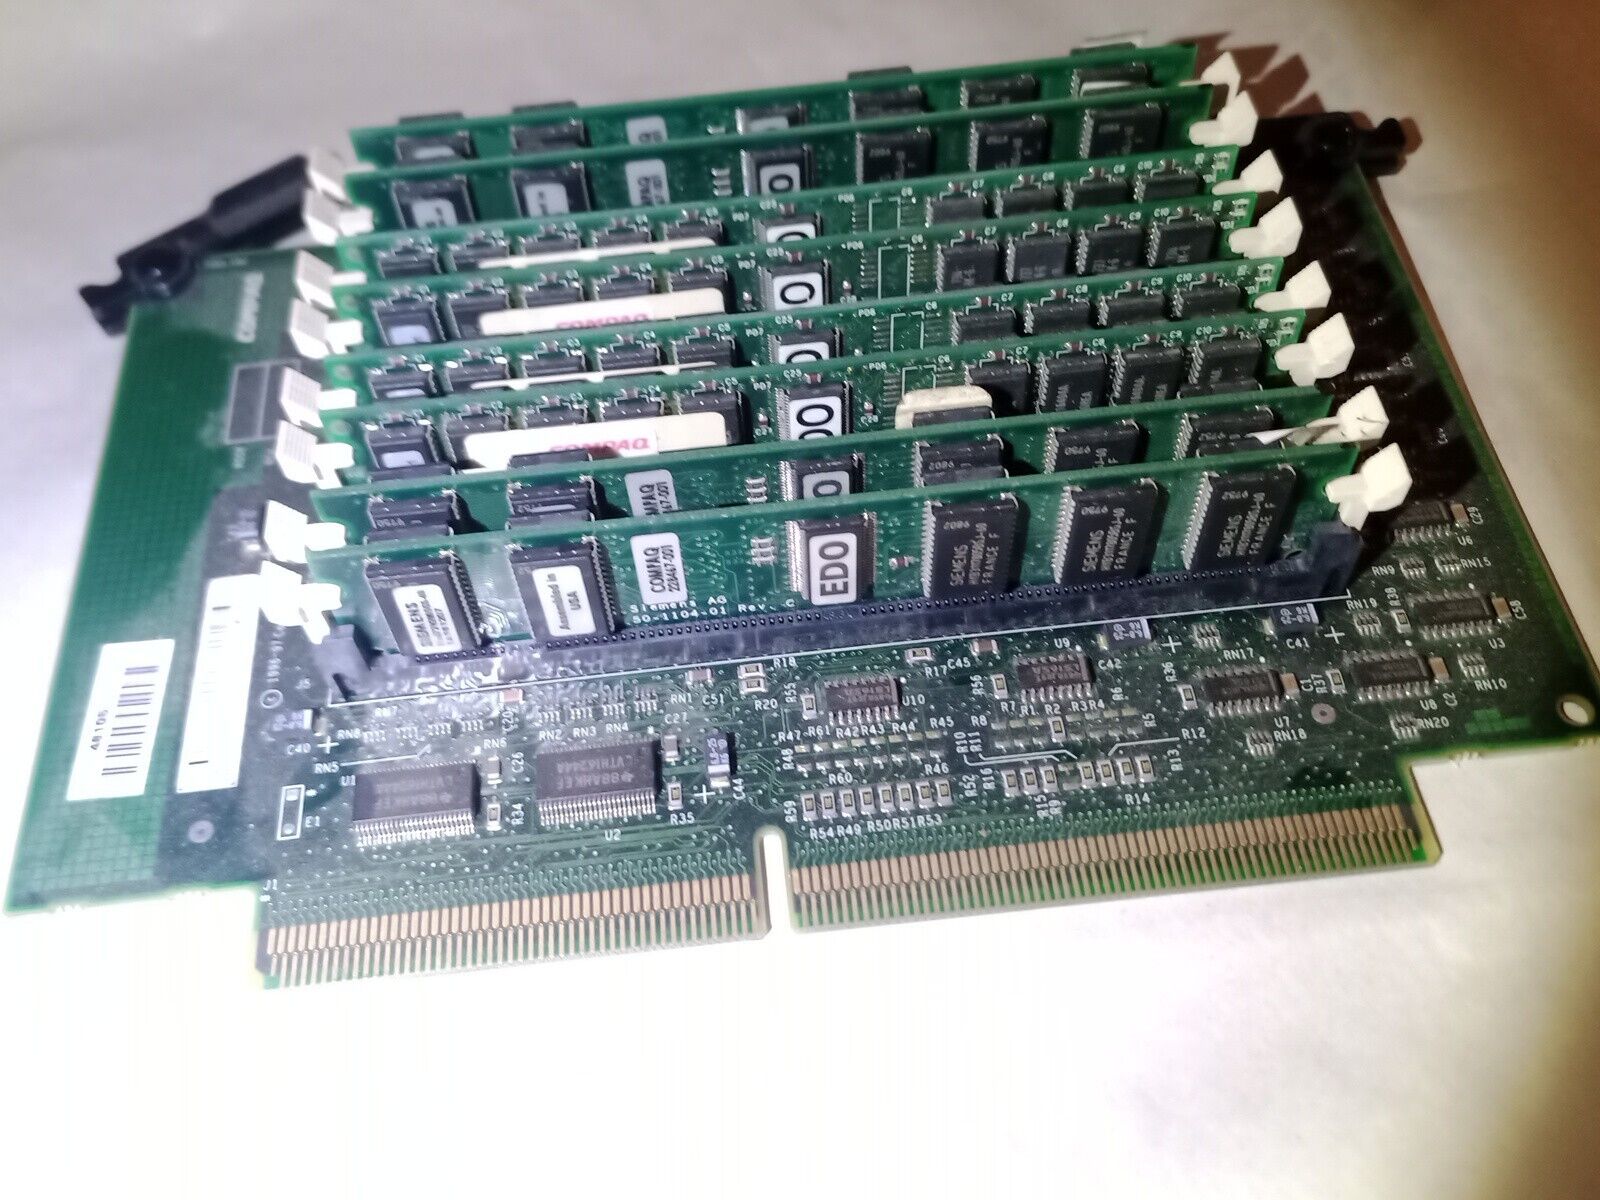 Compaq Memory Expansion Board 270183-001 006434-001 Fully Populated EDO Simms